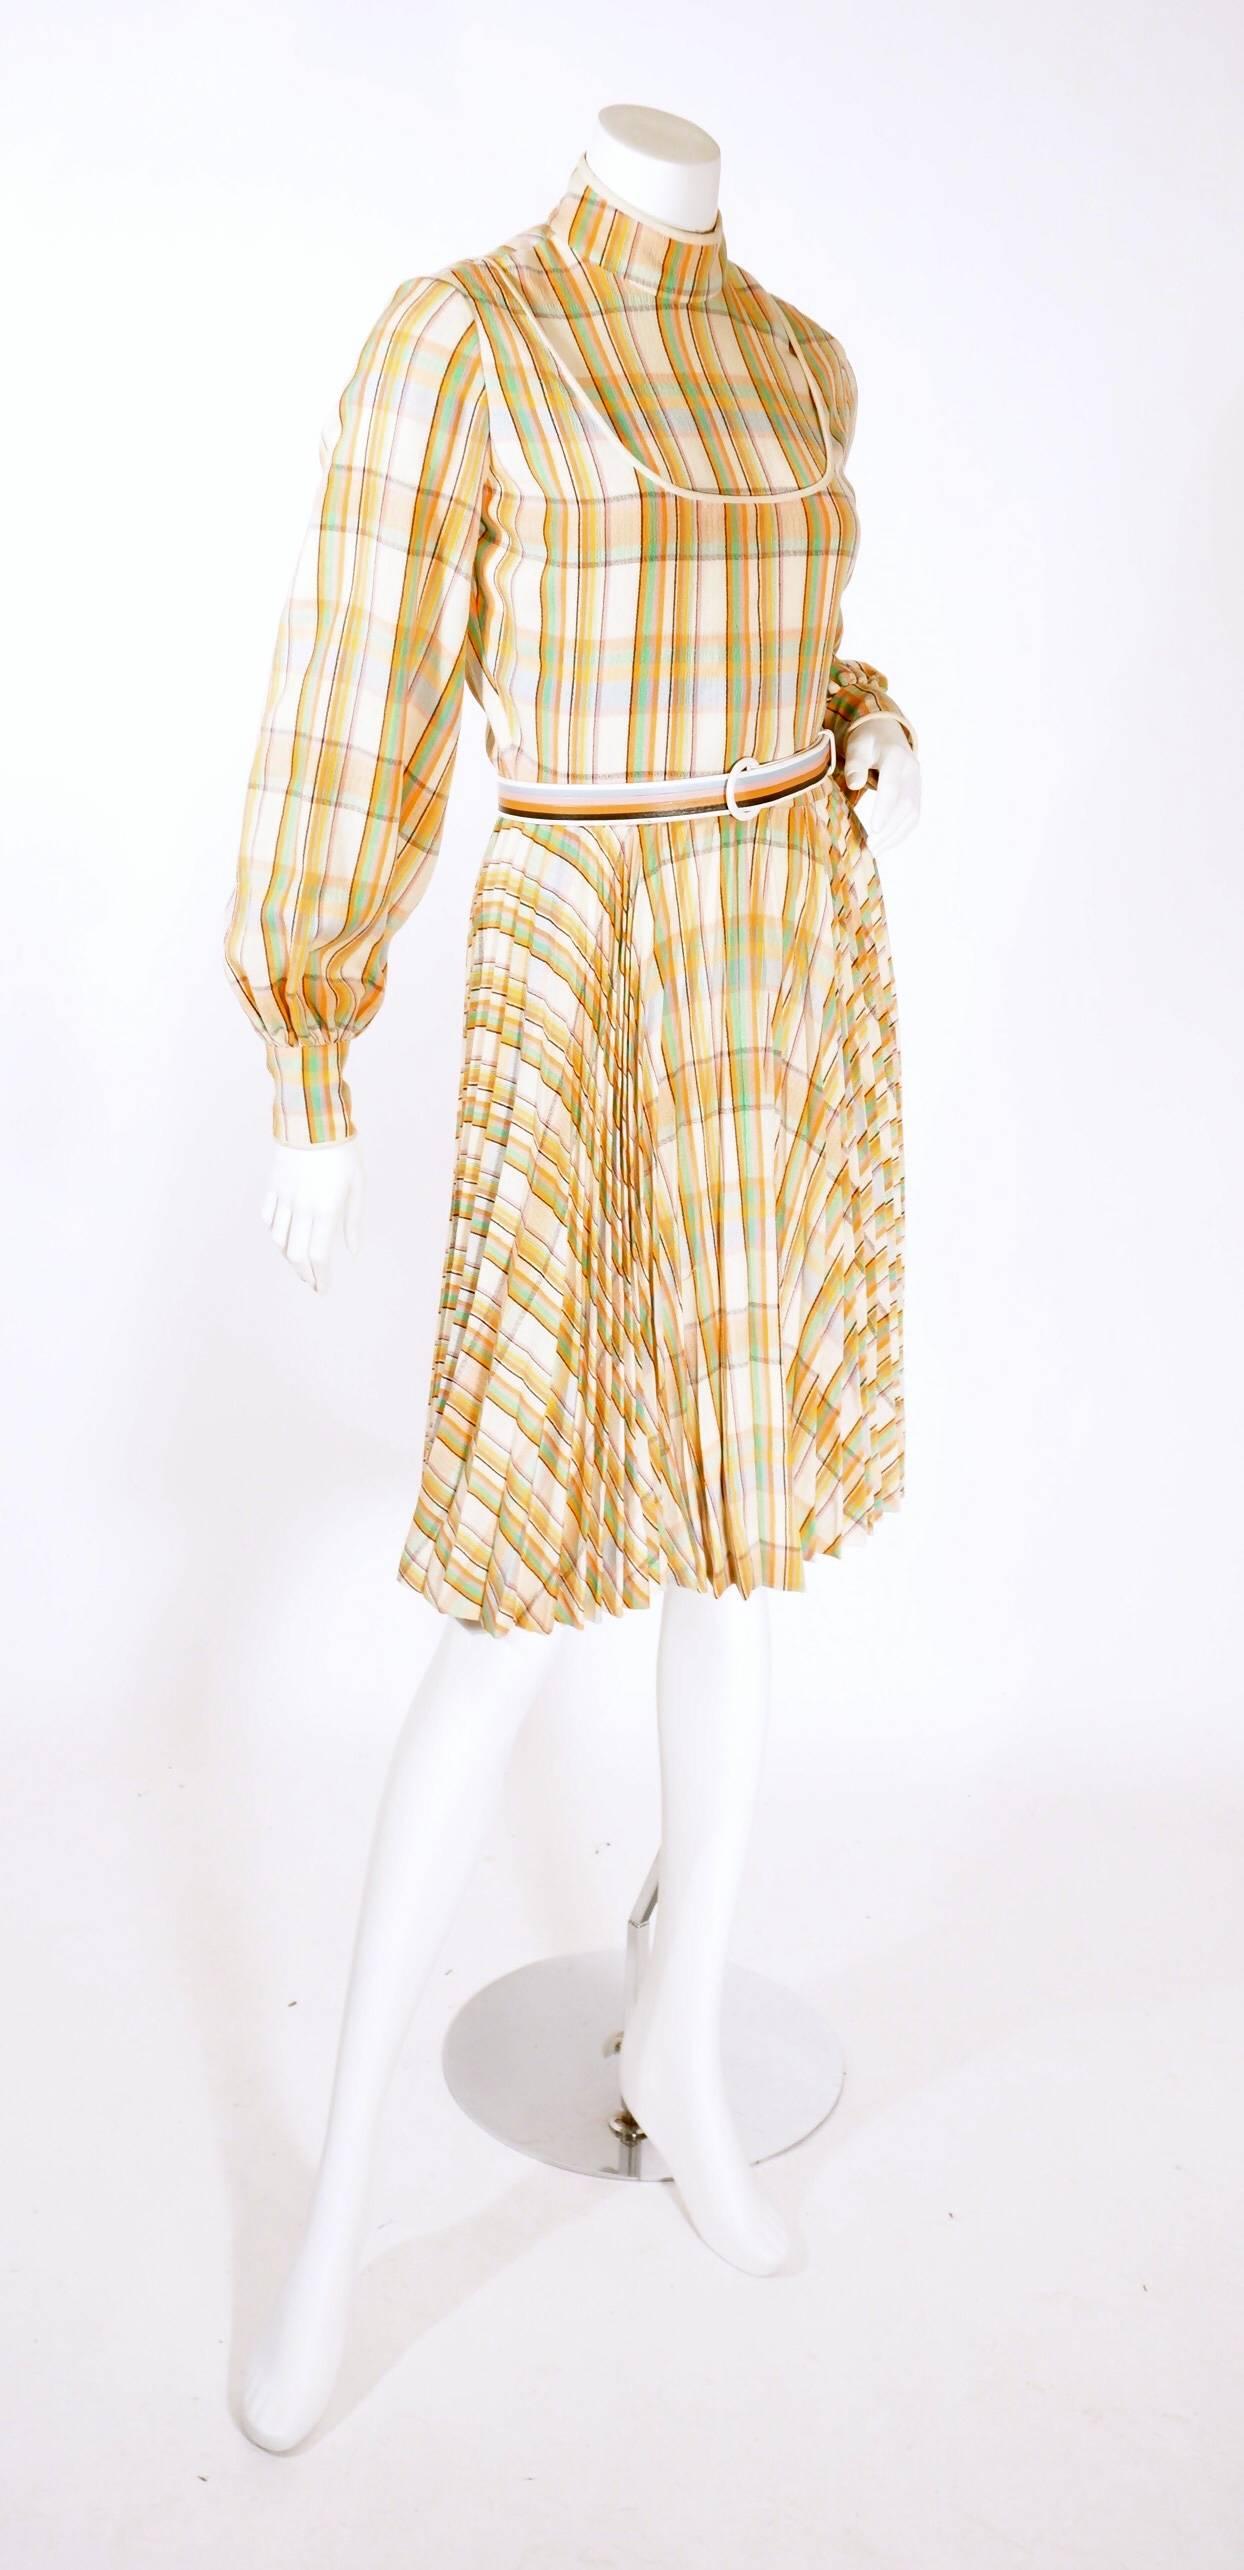 1970's Galanos multi- colored plaid dress. This fun colorful dress features a high neckline, with a vest/shirt illusion and a built-in belt. Wide l/s sleeves with tapered cuffs with buttons and a pleated skirt. Zip back with buttons. 

Excellent